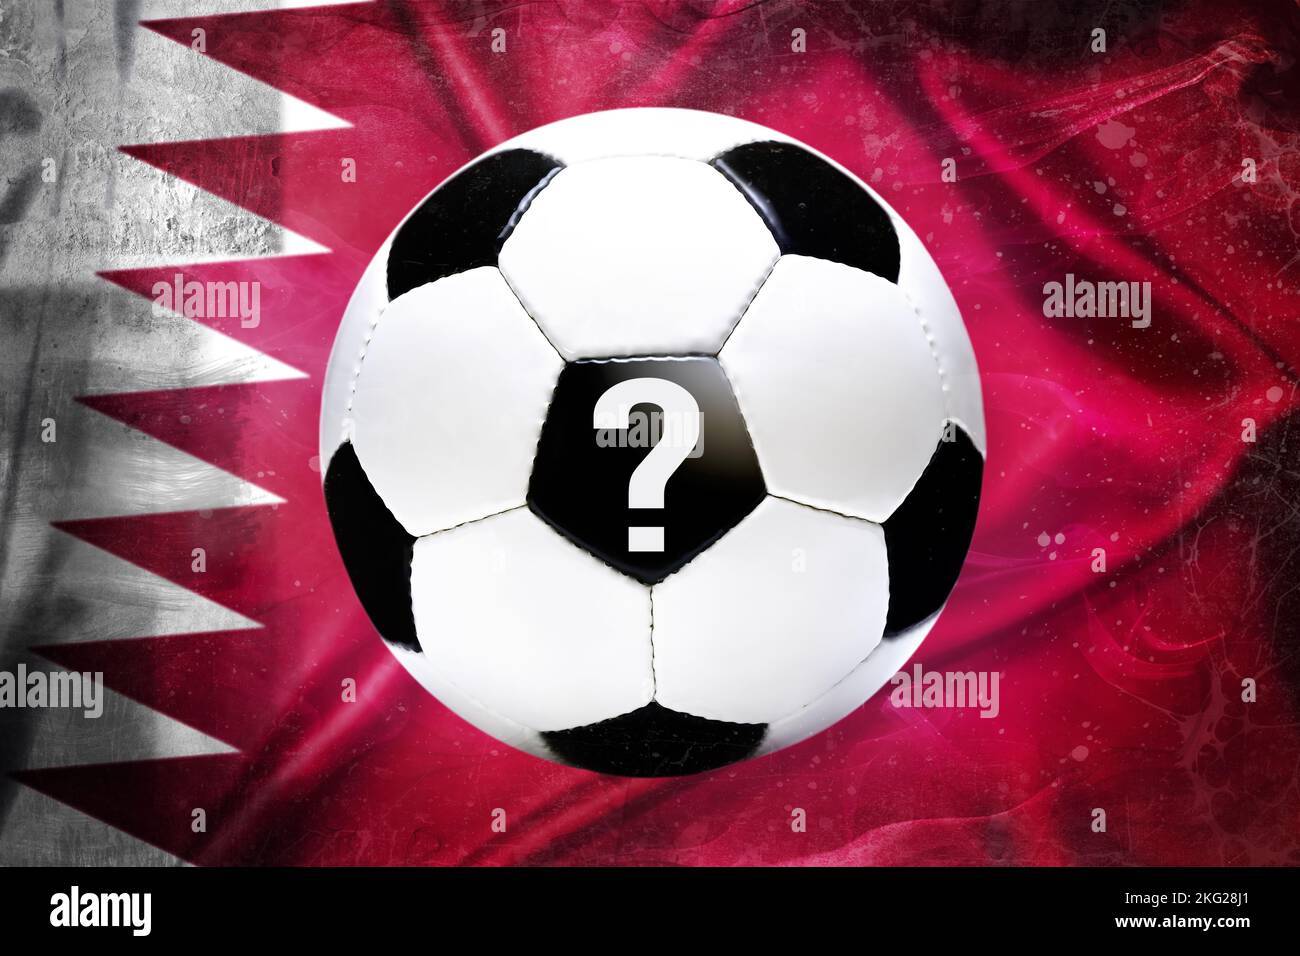 Soccer ball and question mark in front of the flag of Qatar, boycott of the football world cup, symbolic image Stock Photo